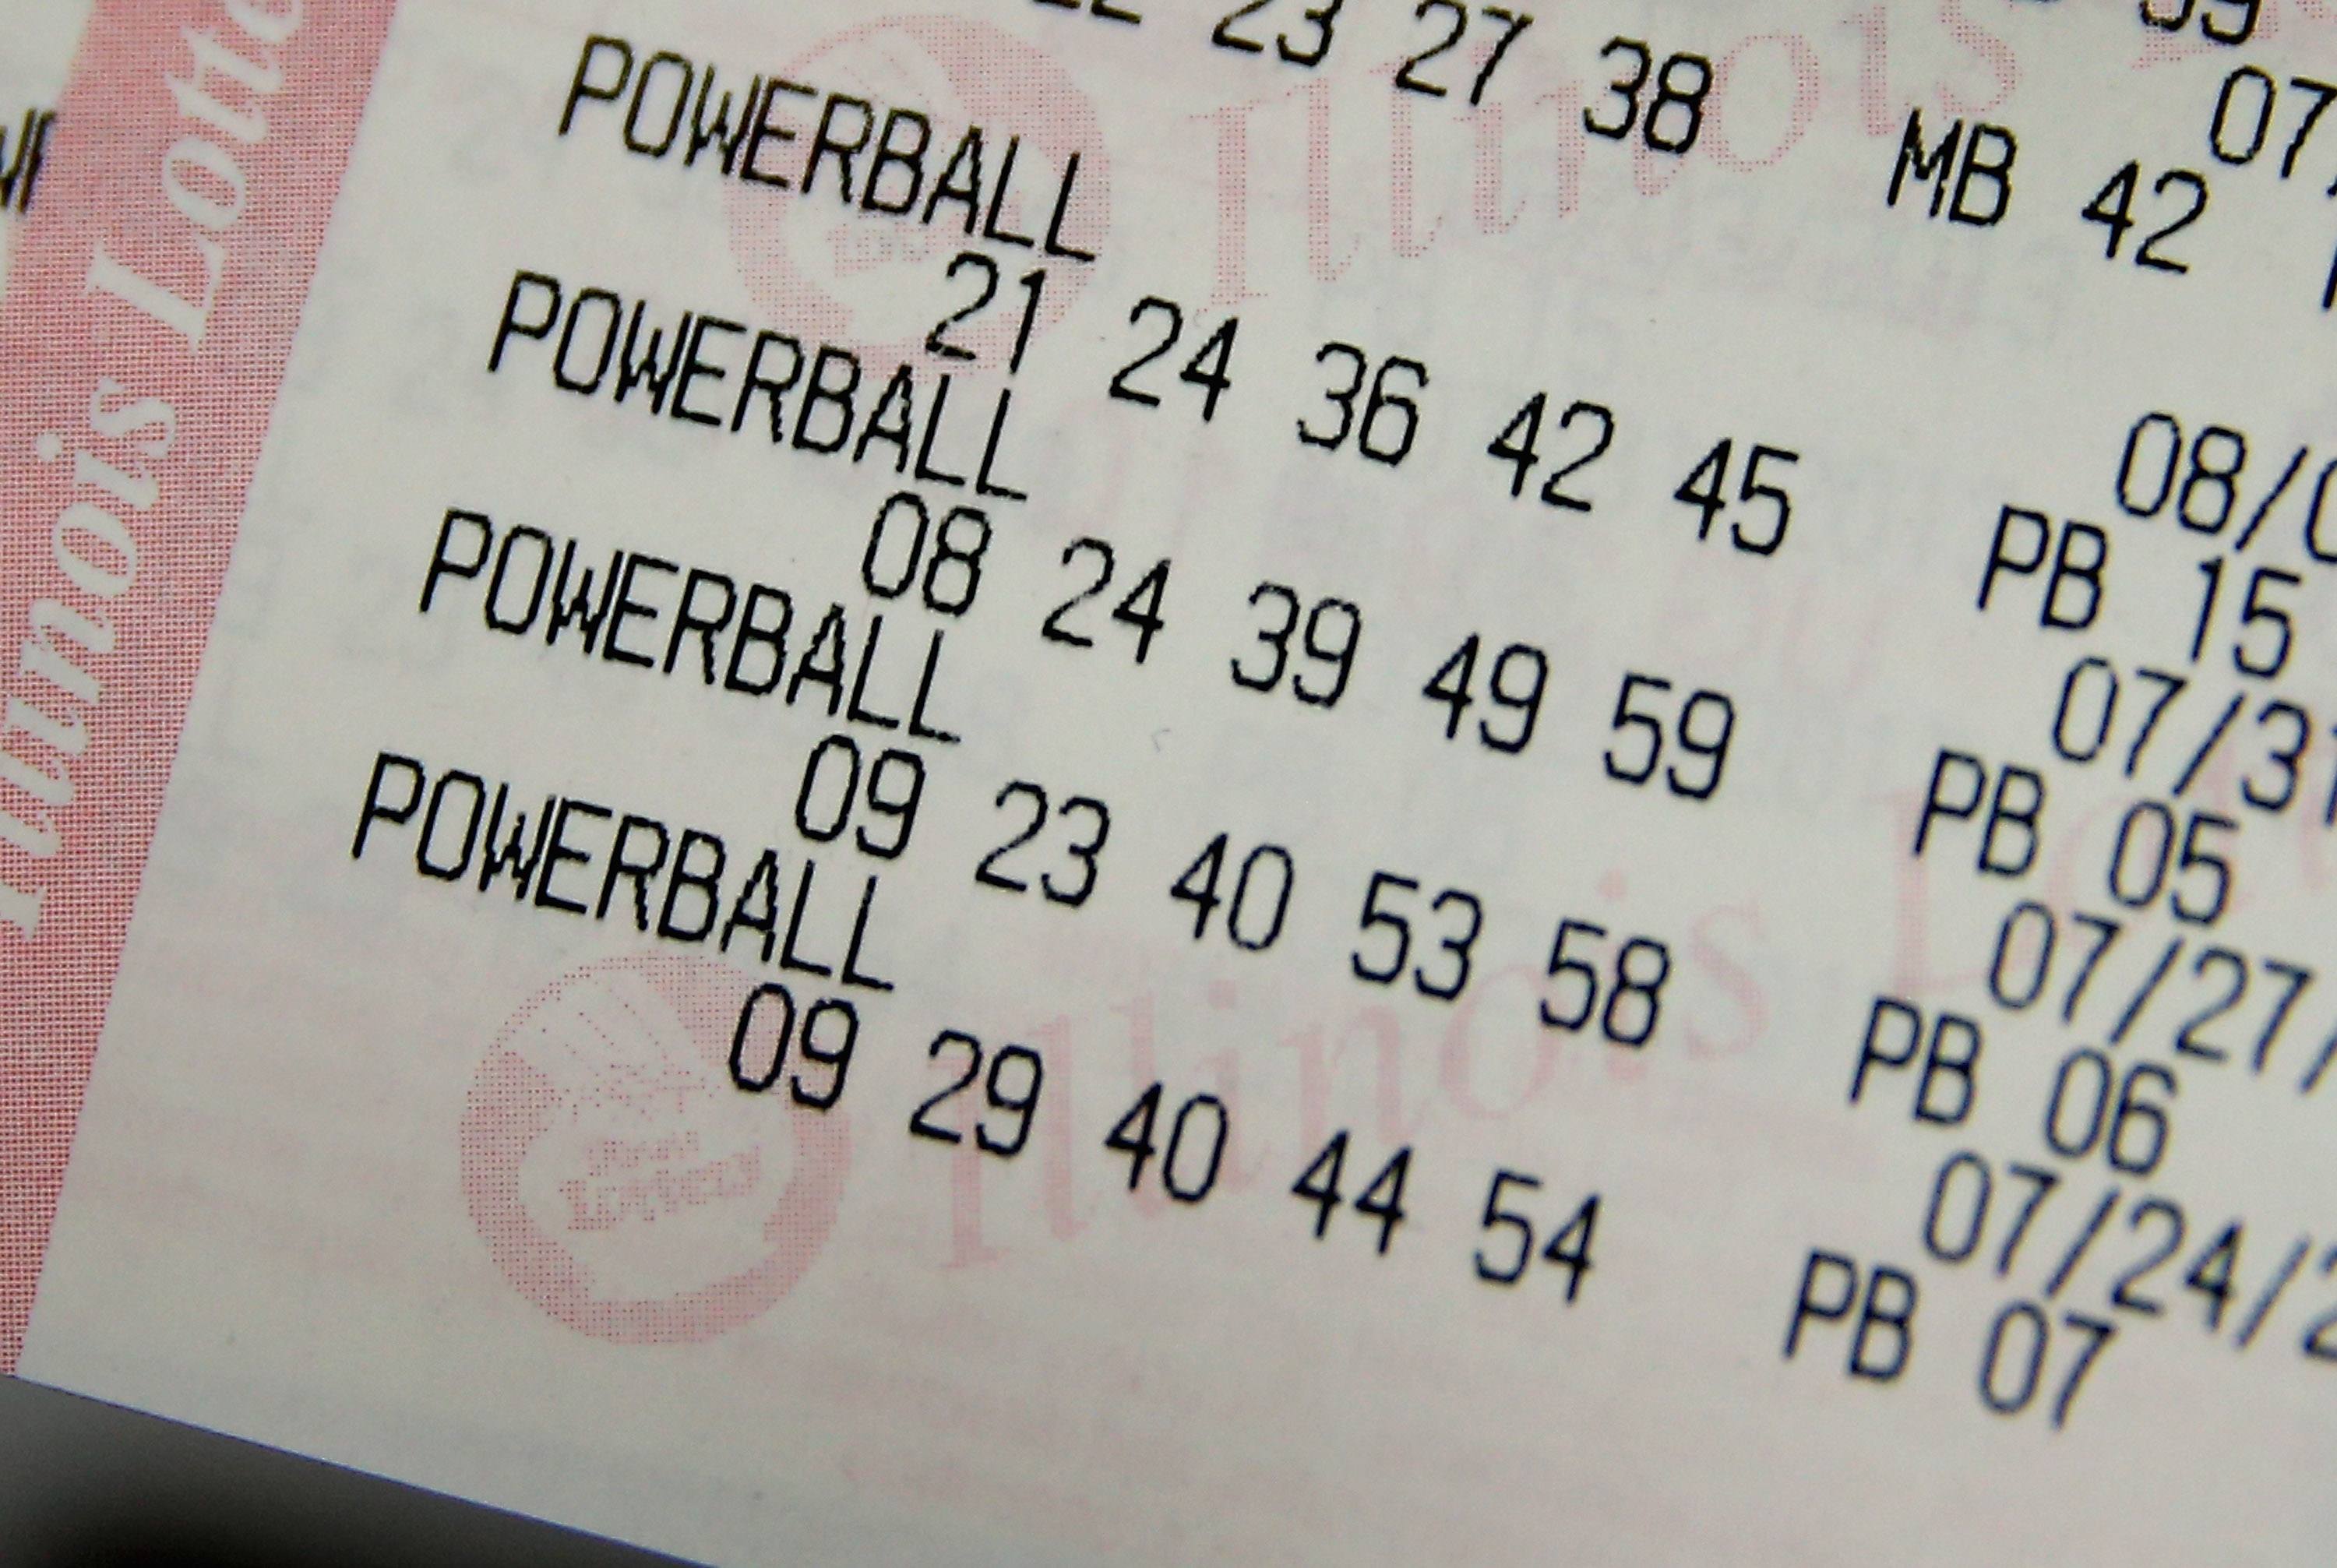 what are the best lotto numbers